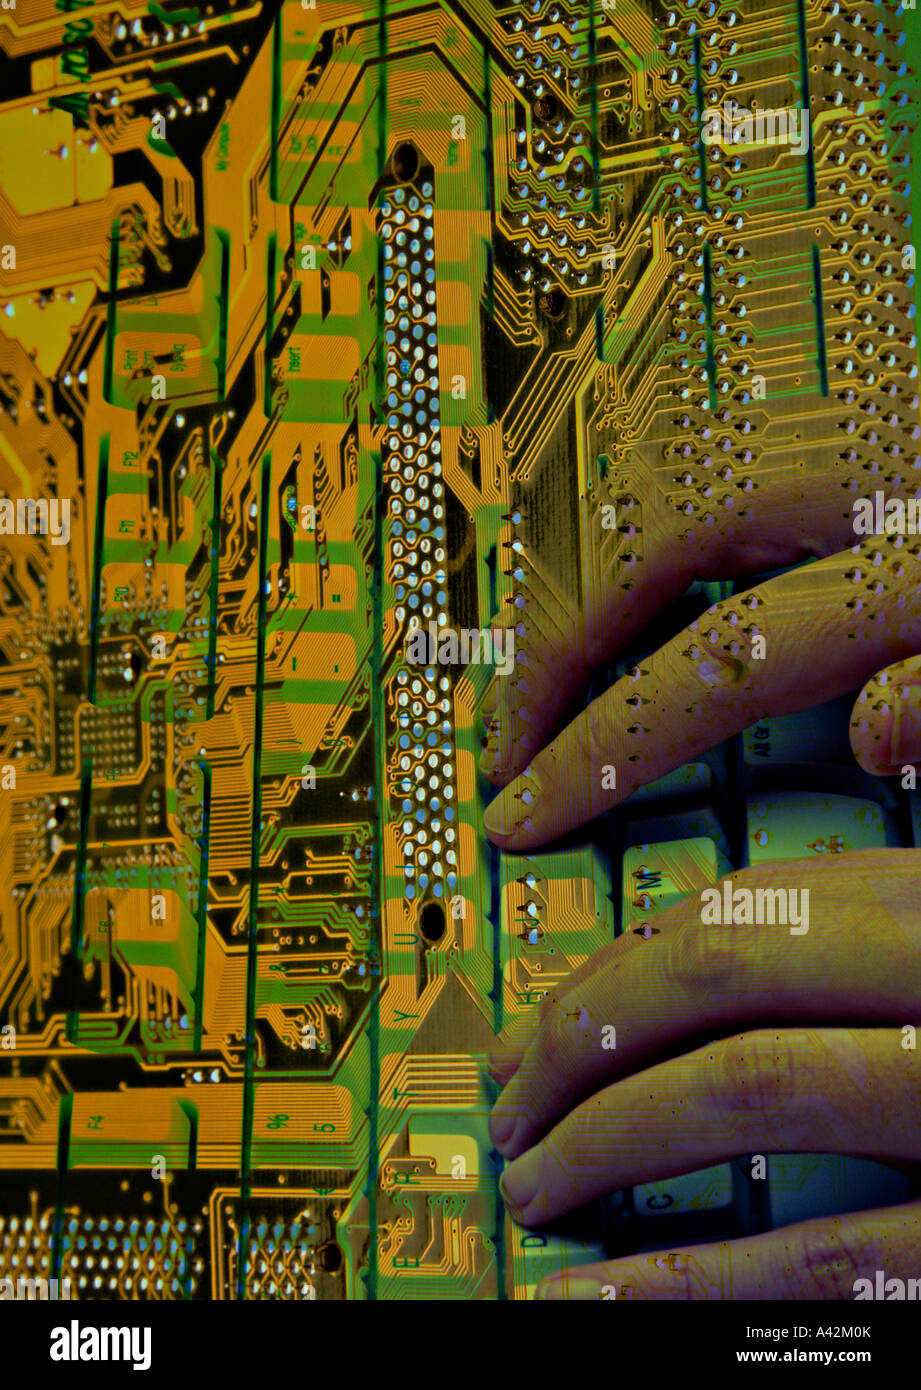 Computer motherboard with hands on computer keyboard Digital art Stock  Photo - Alamy